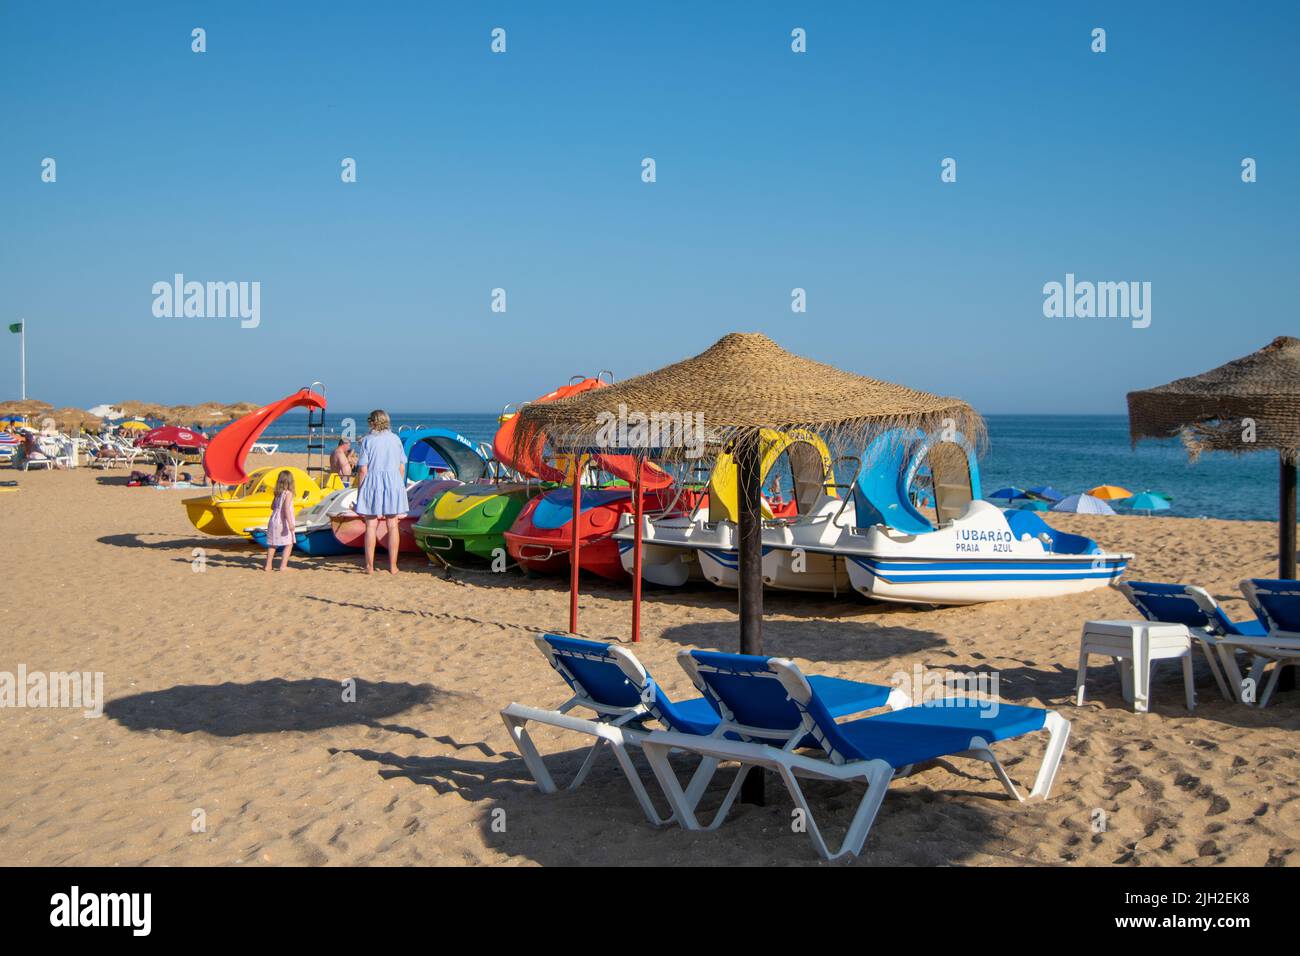 Summer beach days, beach business, tourism commodities on the beach. Beach umbrella and rental boats. Vacations and hollydays. Algarve South Portugal. Stock Photo